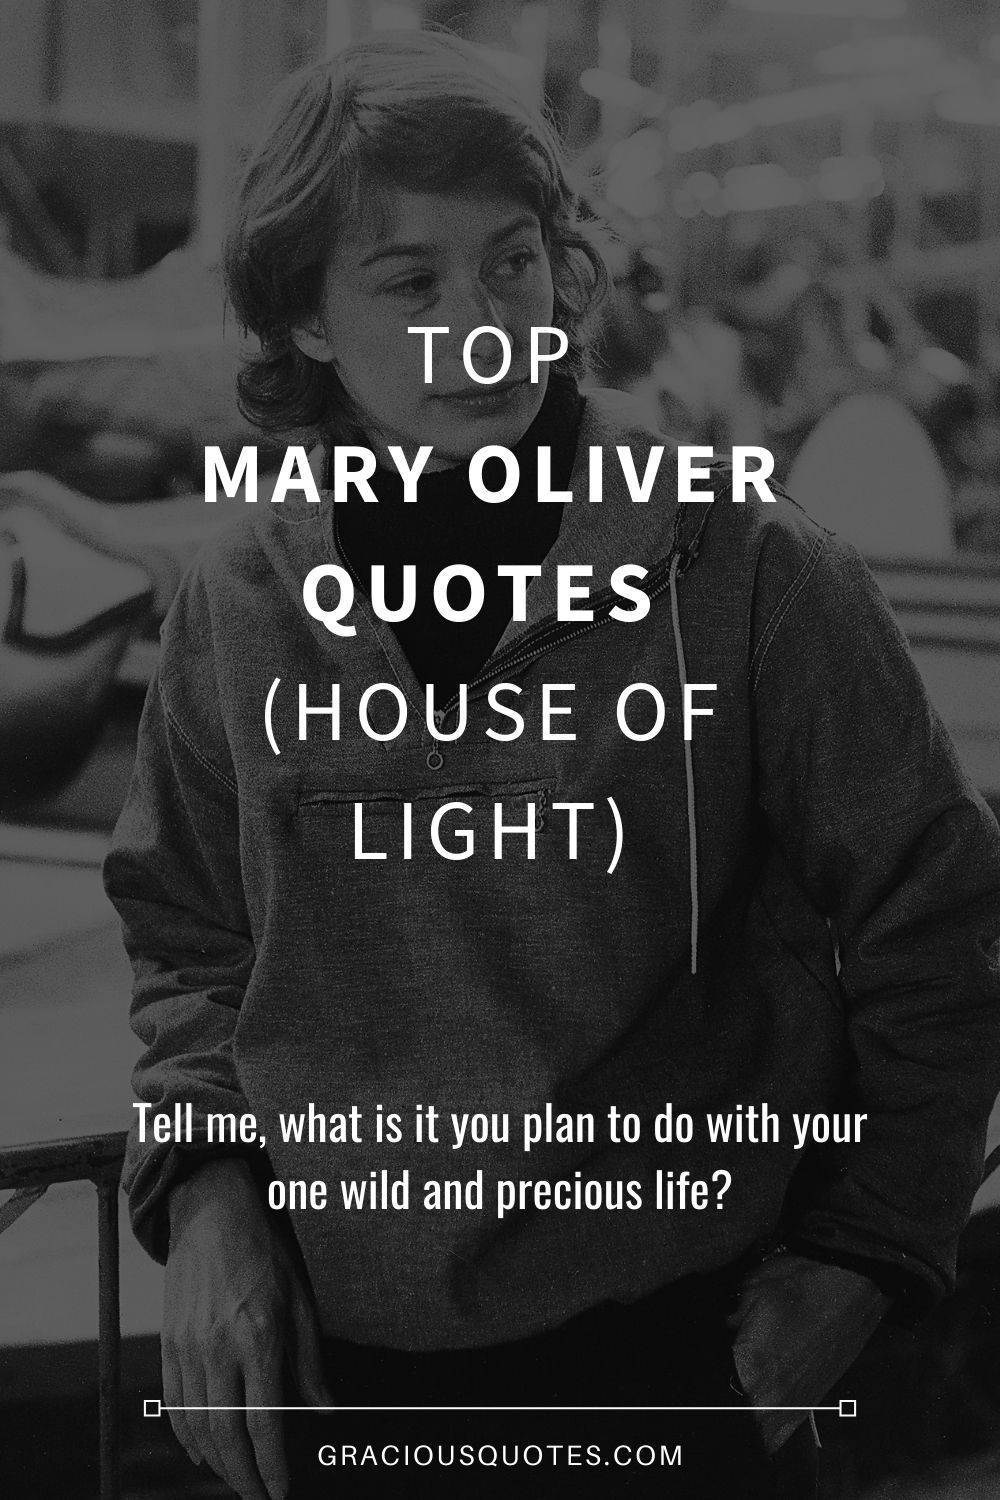 Top Mary Oliver Quotes (HOUSE OF LIGHT) - Gracious Quotes